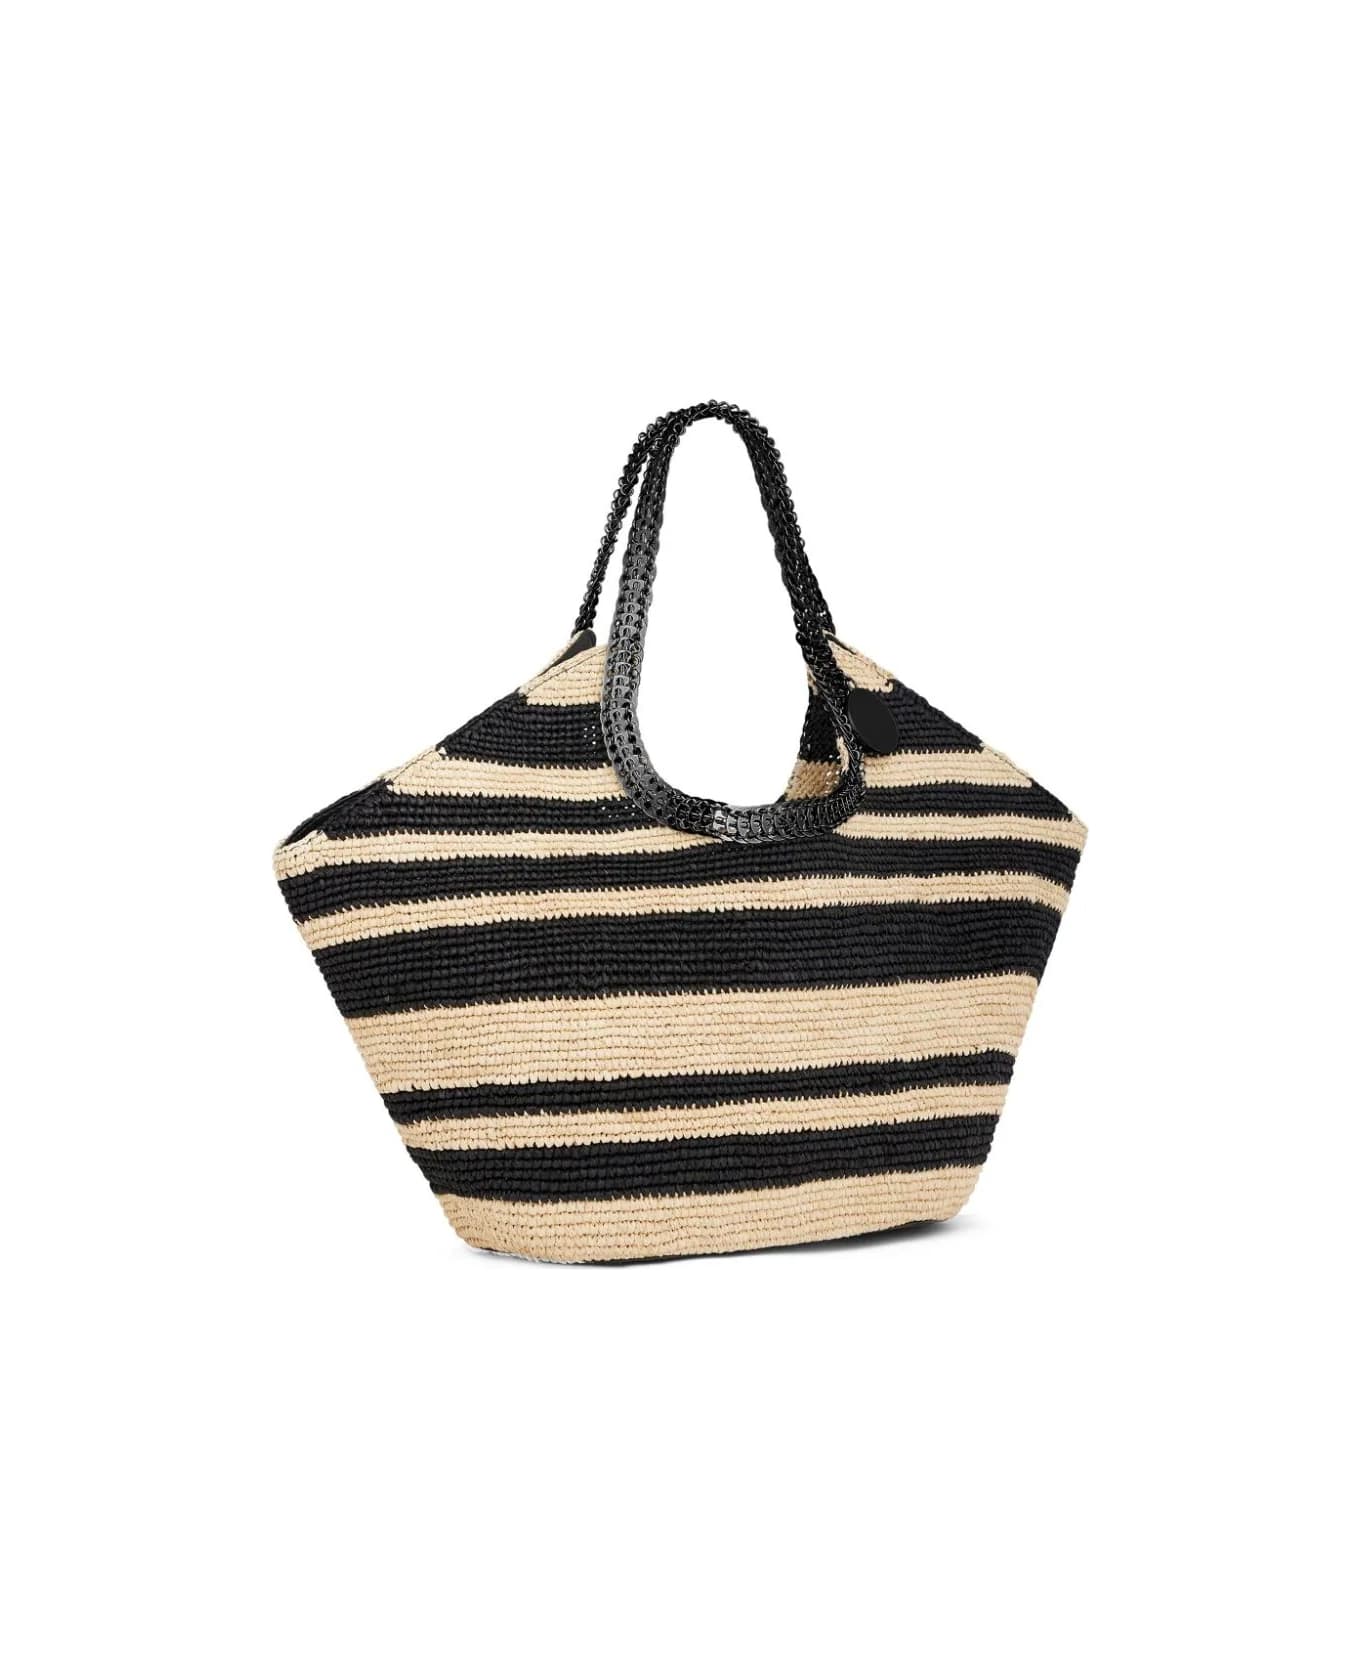 Paco Rabanne Striped Raffia Tote Bag With 1969 Discs Details - Brown トートバッグ